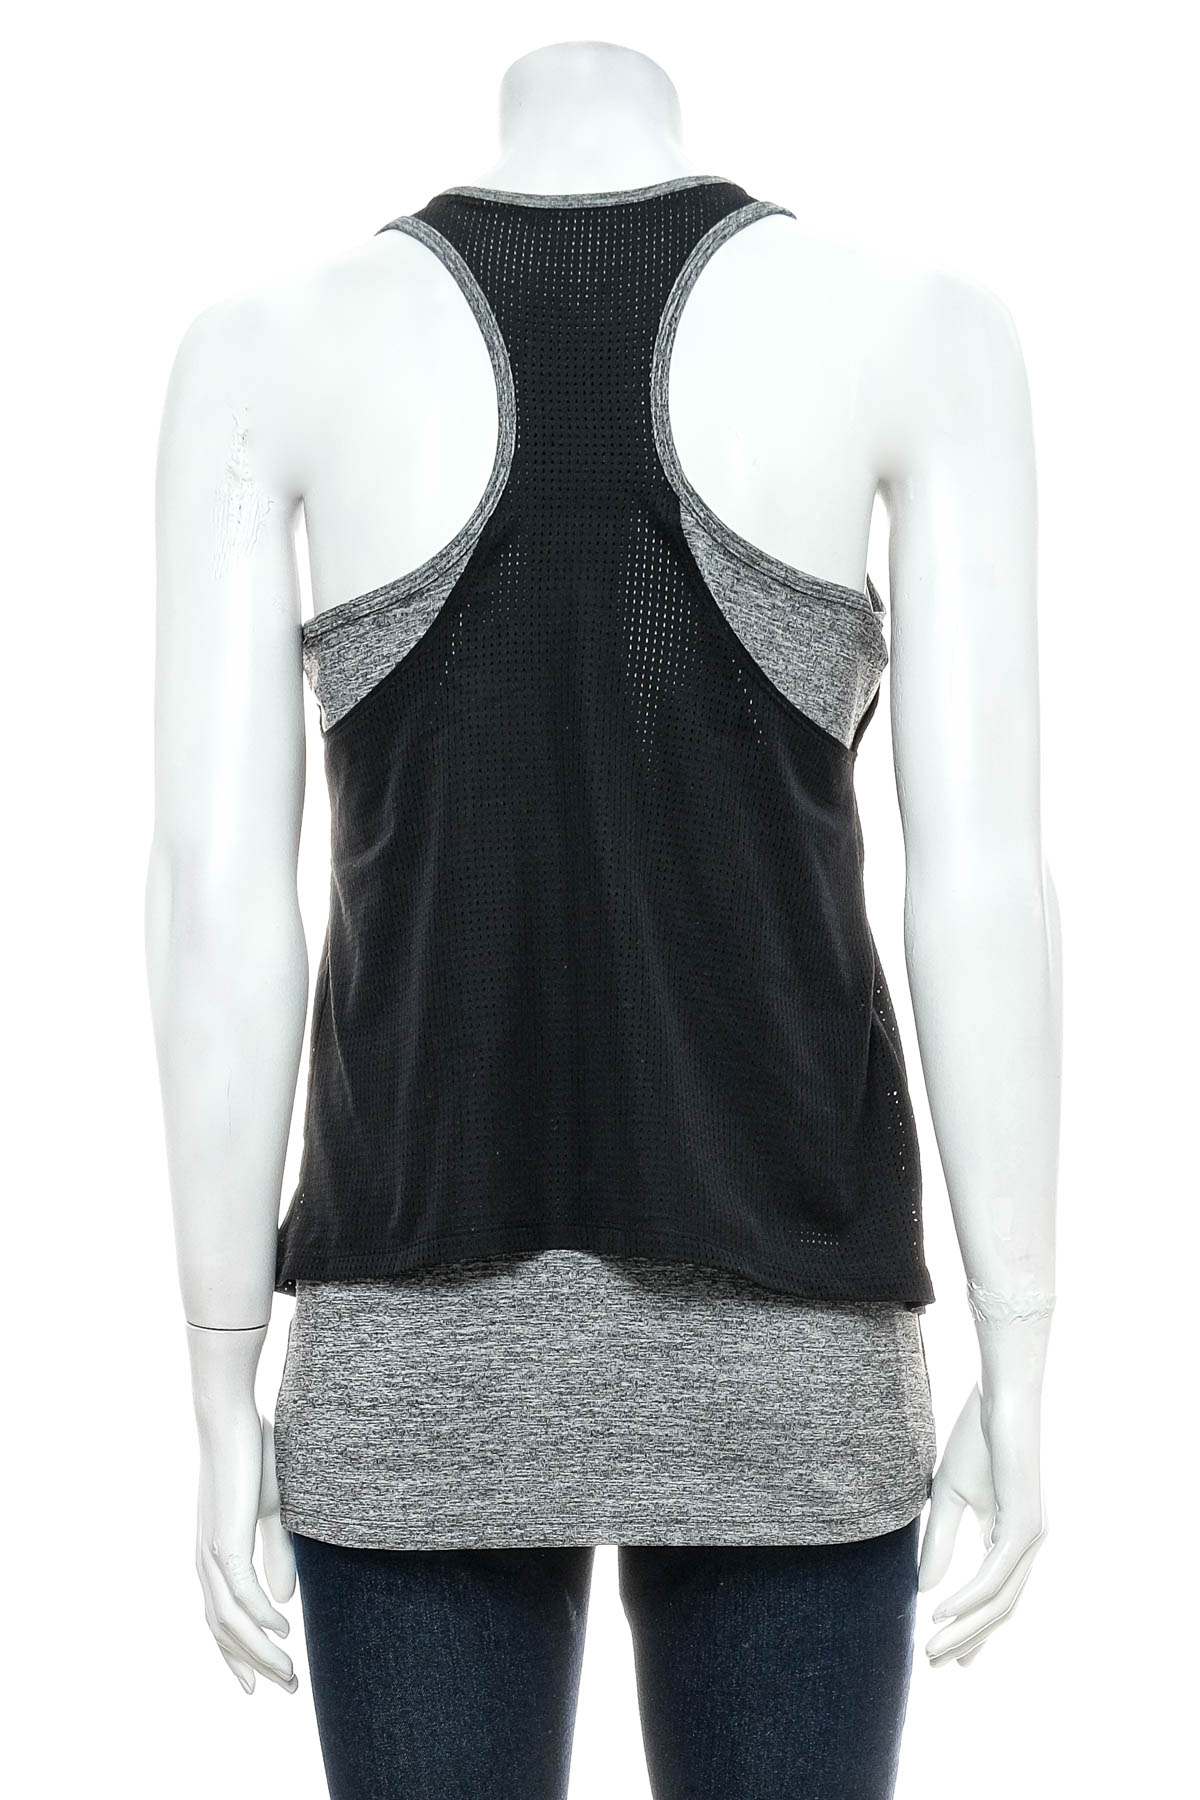 Women's top - Active LIMITED by Tchibo - 1